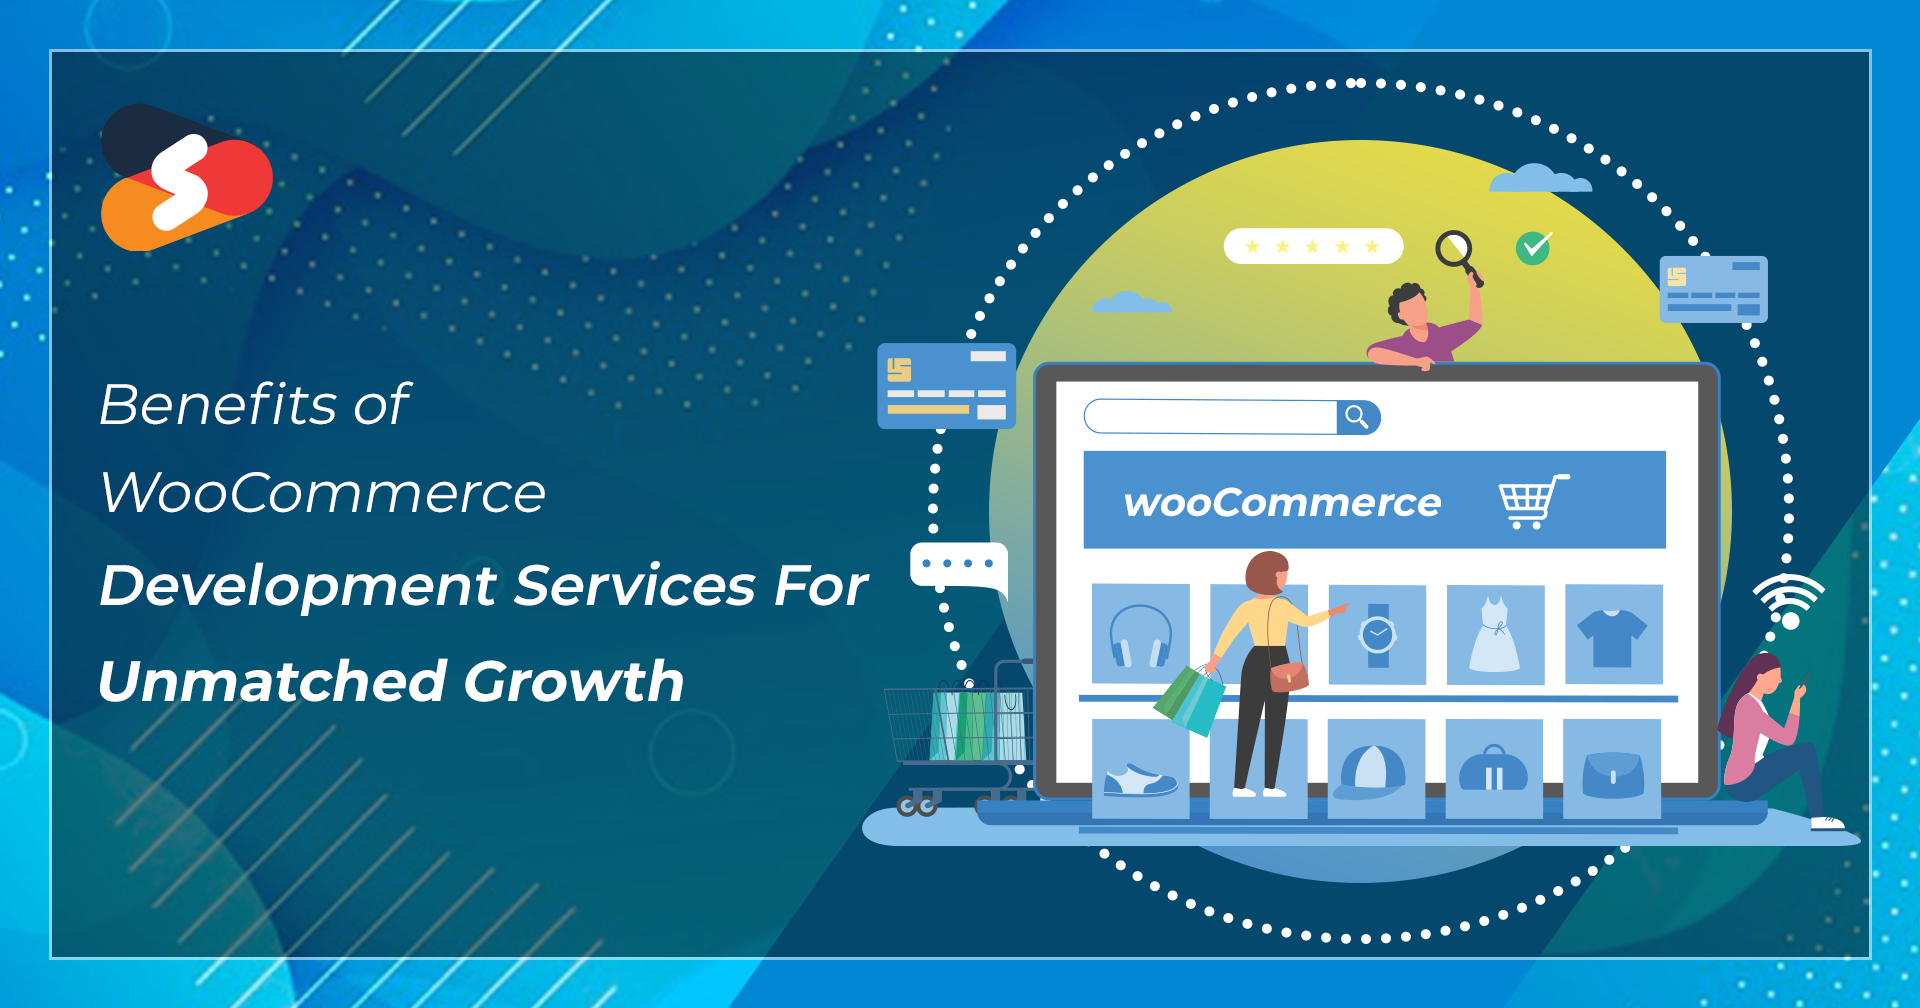 Benefits of WooCommerce Development Services For Unmatched Growth